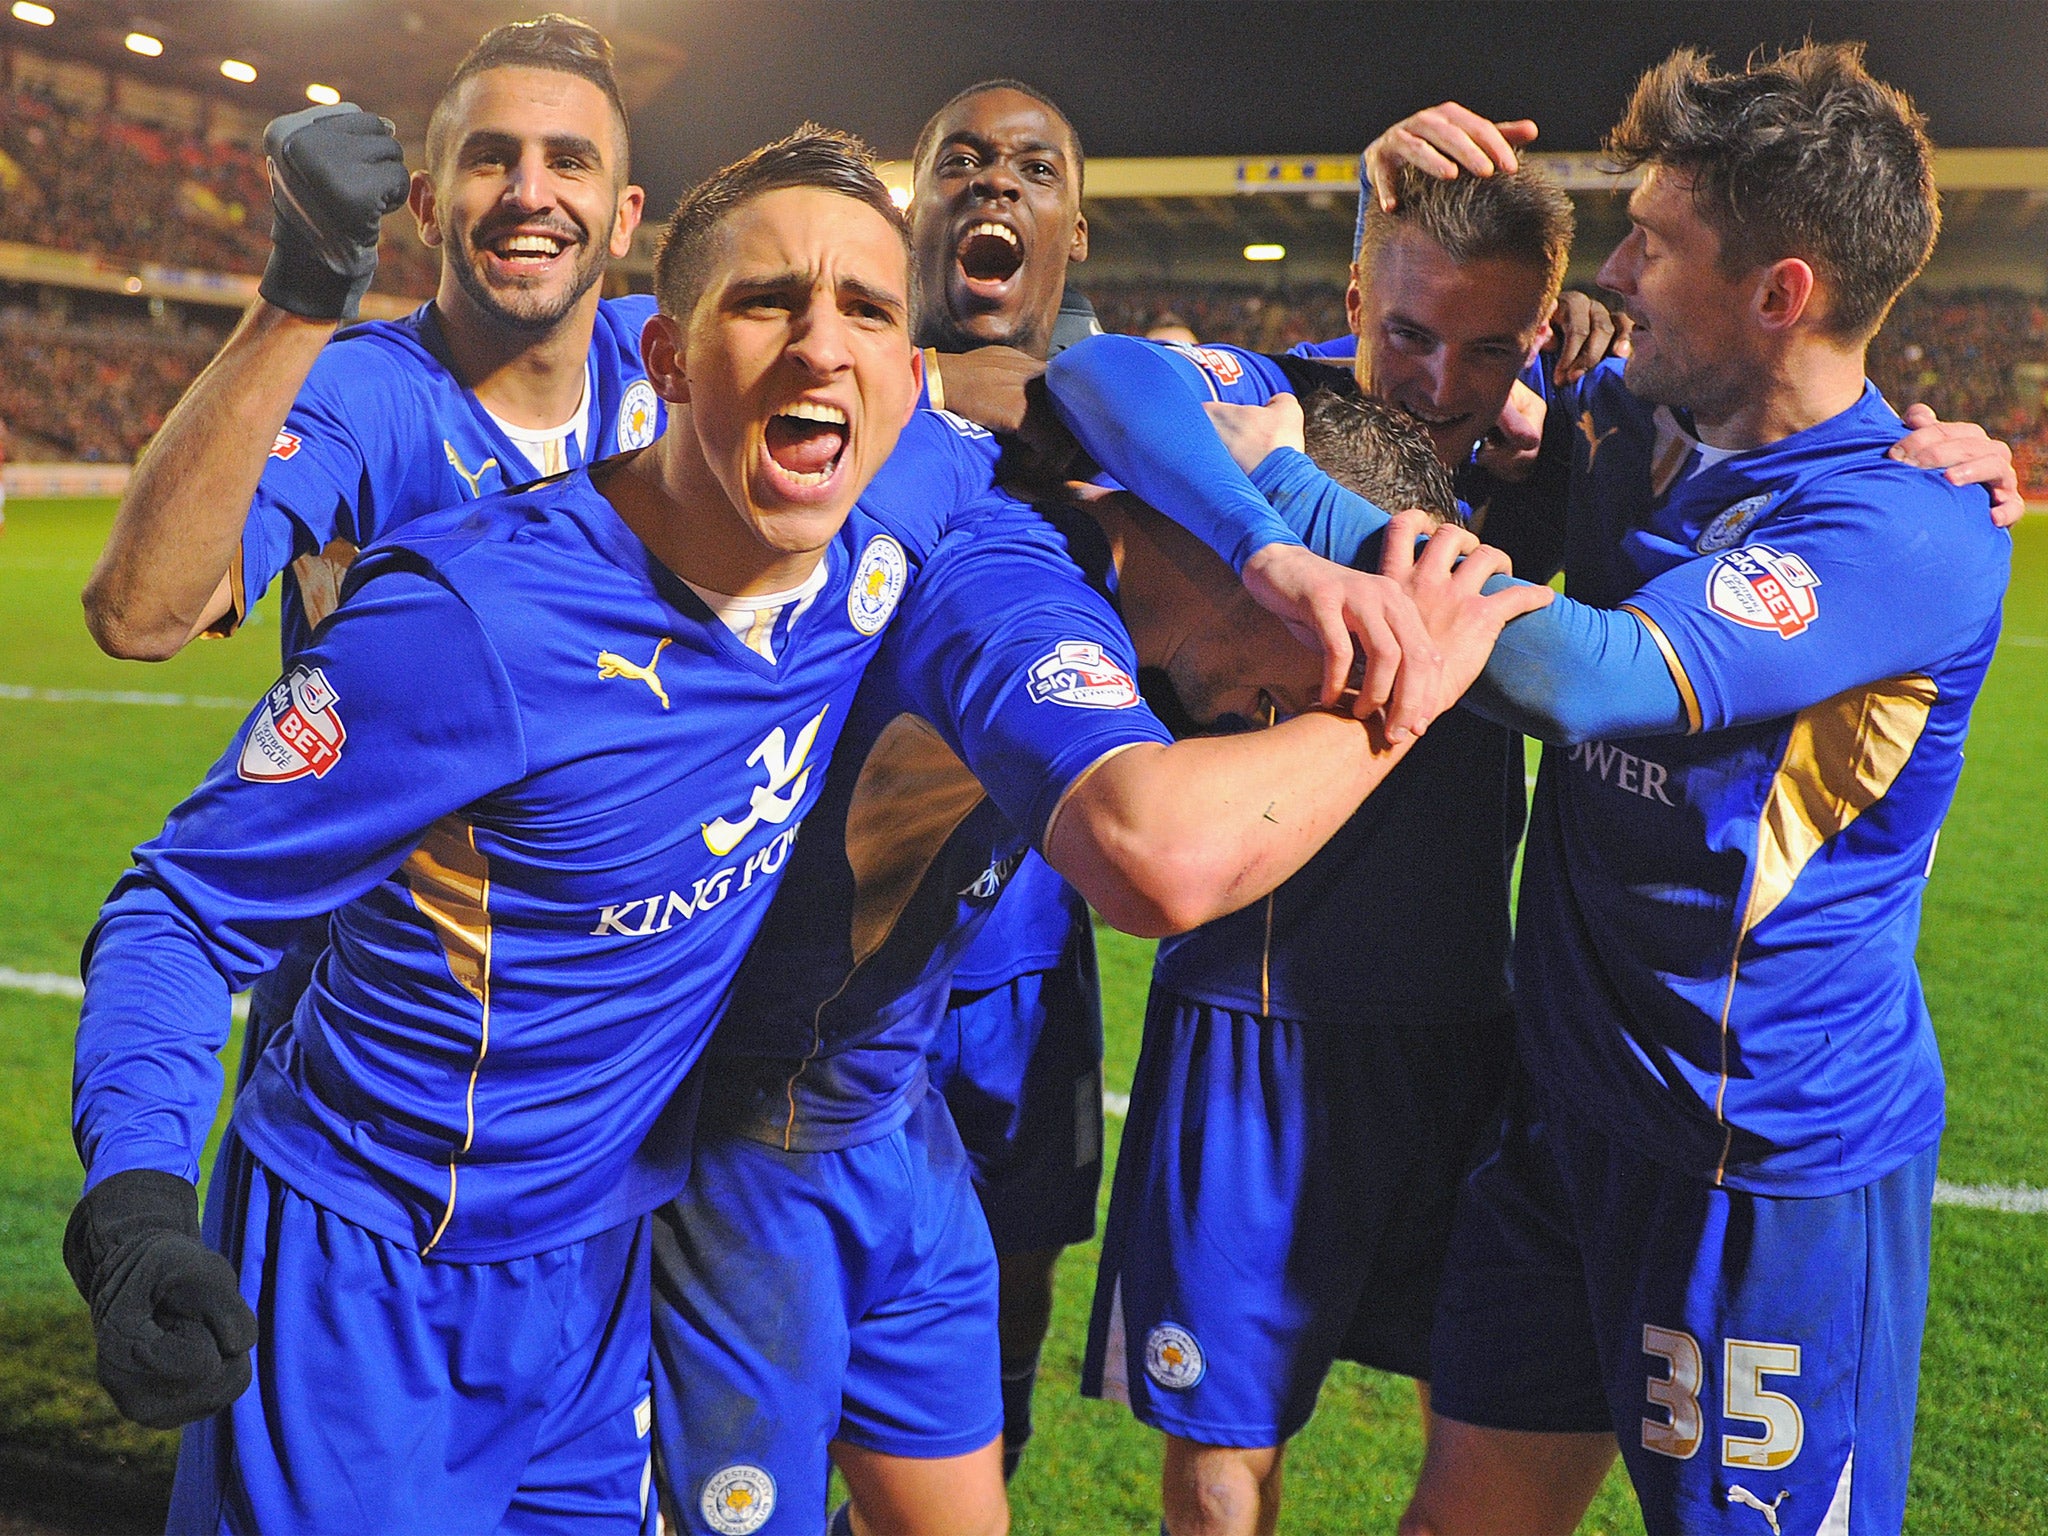 Leicester City edged closer to automatic promotion